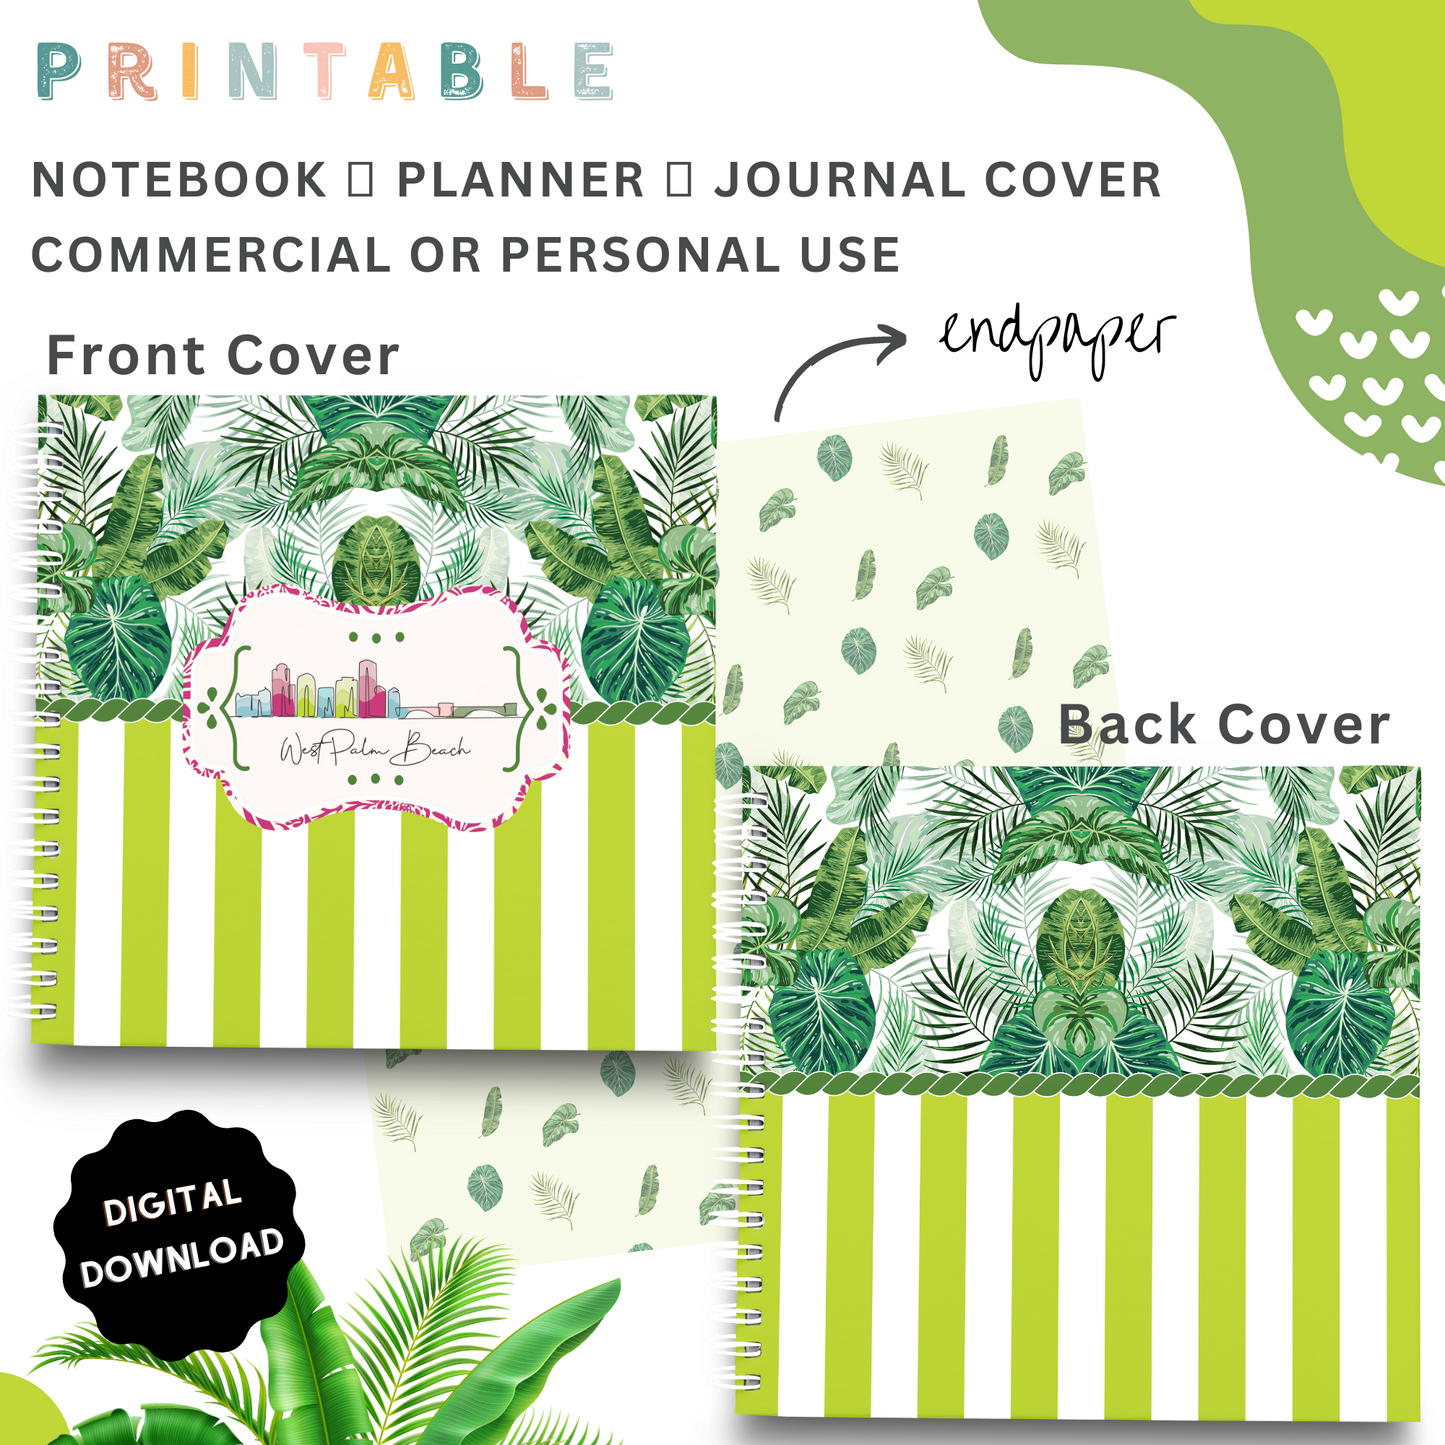 Planner me to - Printable Planner, Journal & Notepad Cover